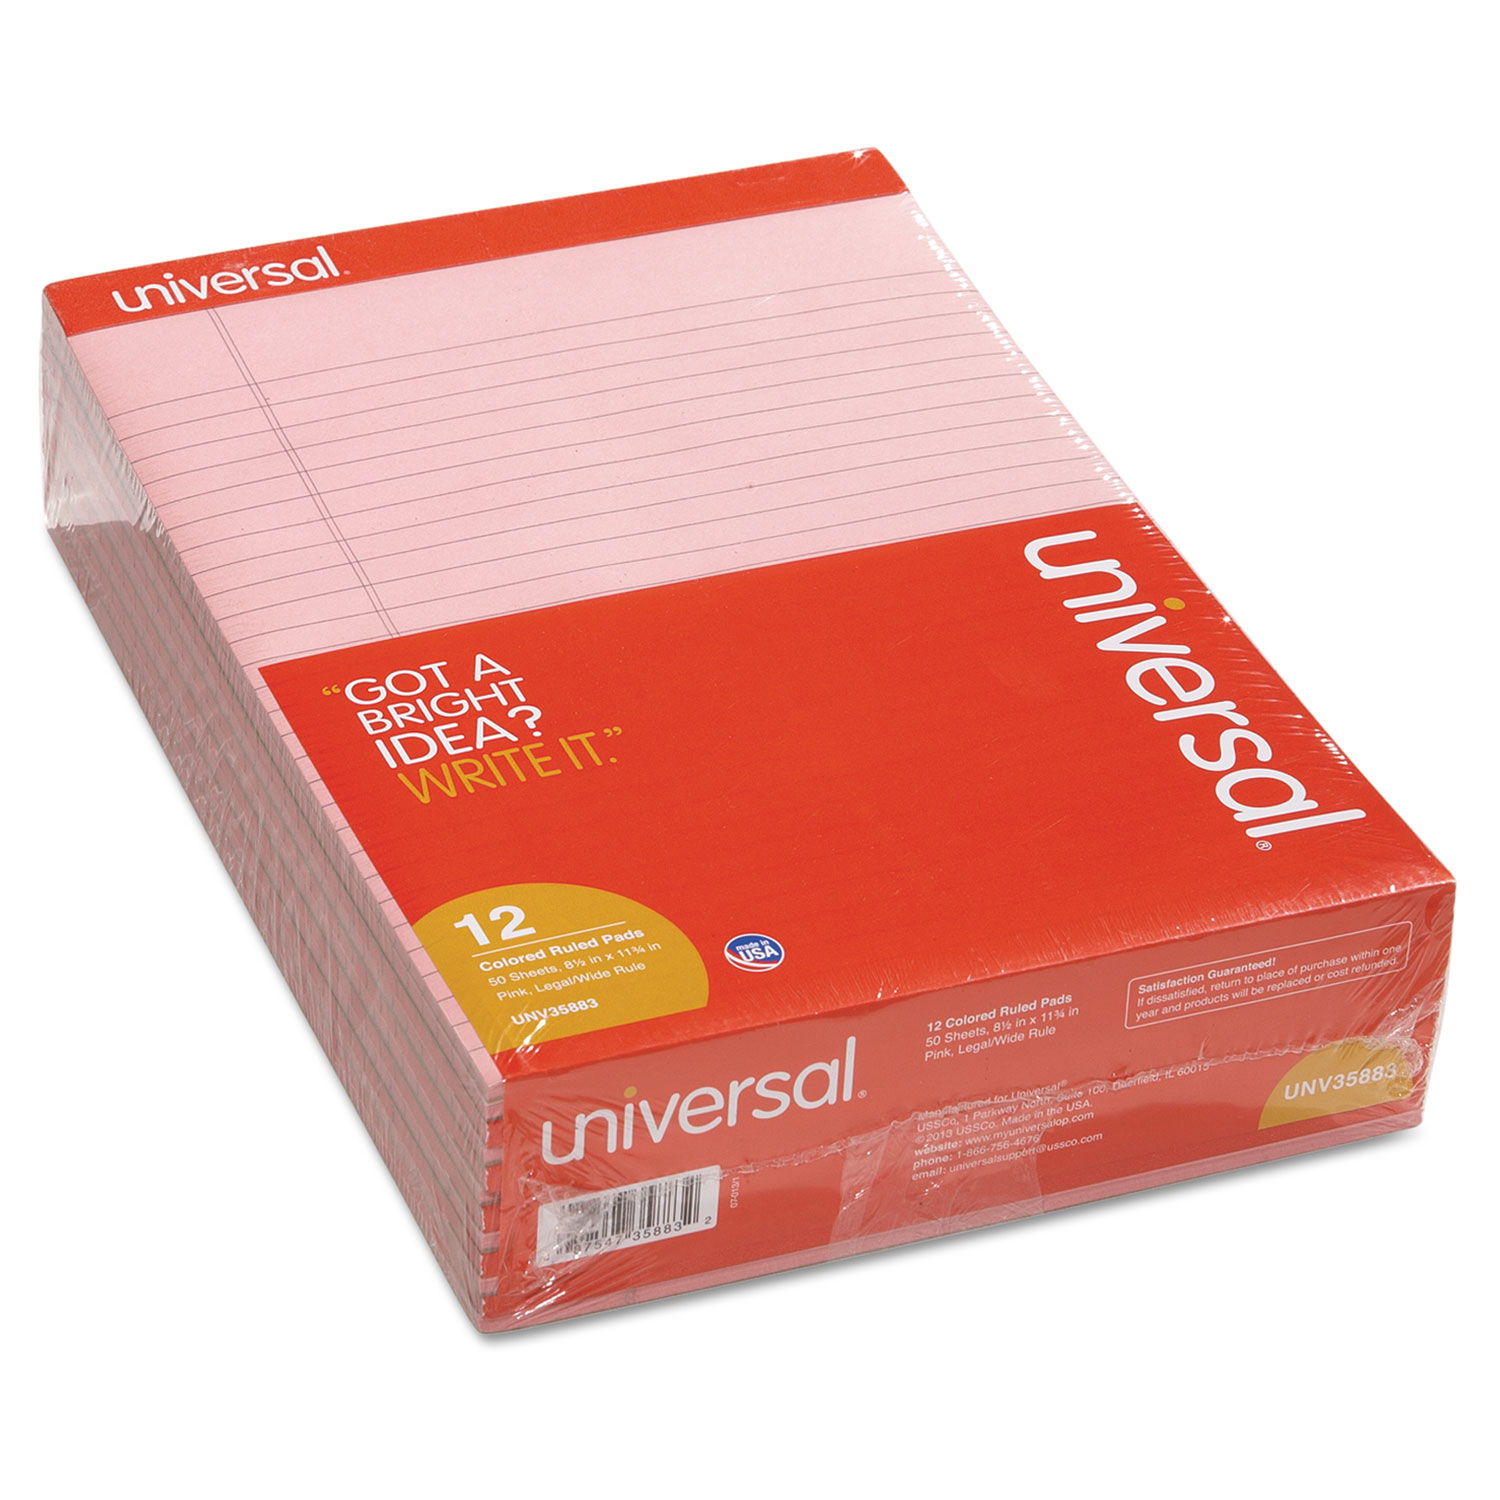  Universal UNV35883 Colored Perforated Writing Pads, Wide/Legal Rule, 8.5 x 11, Pink, 50 Sheets, Dozen (UNV35883) 